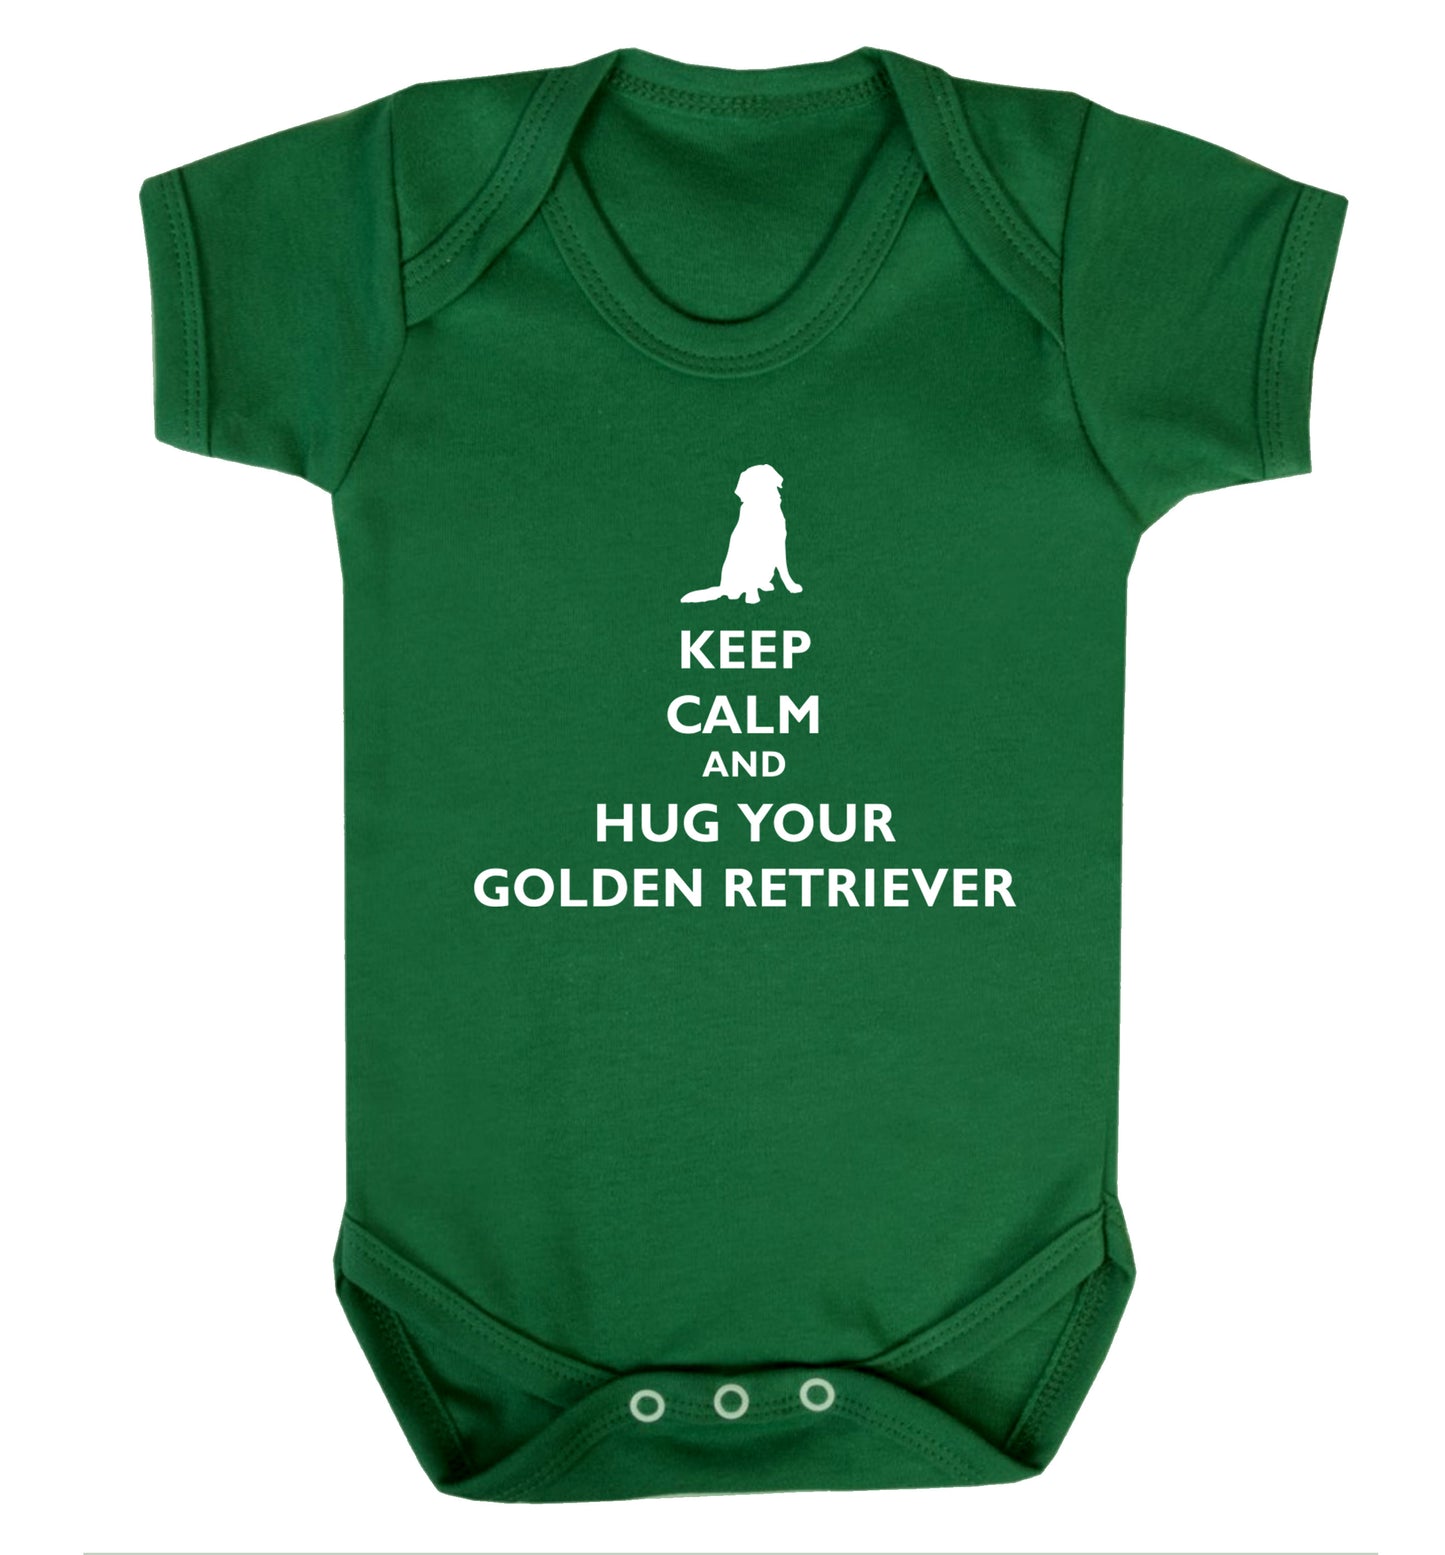 Keep calm and hug your golden retriever Baby Vest green 18-24 months